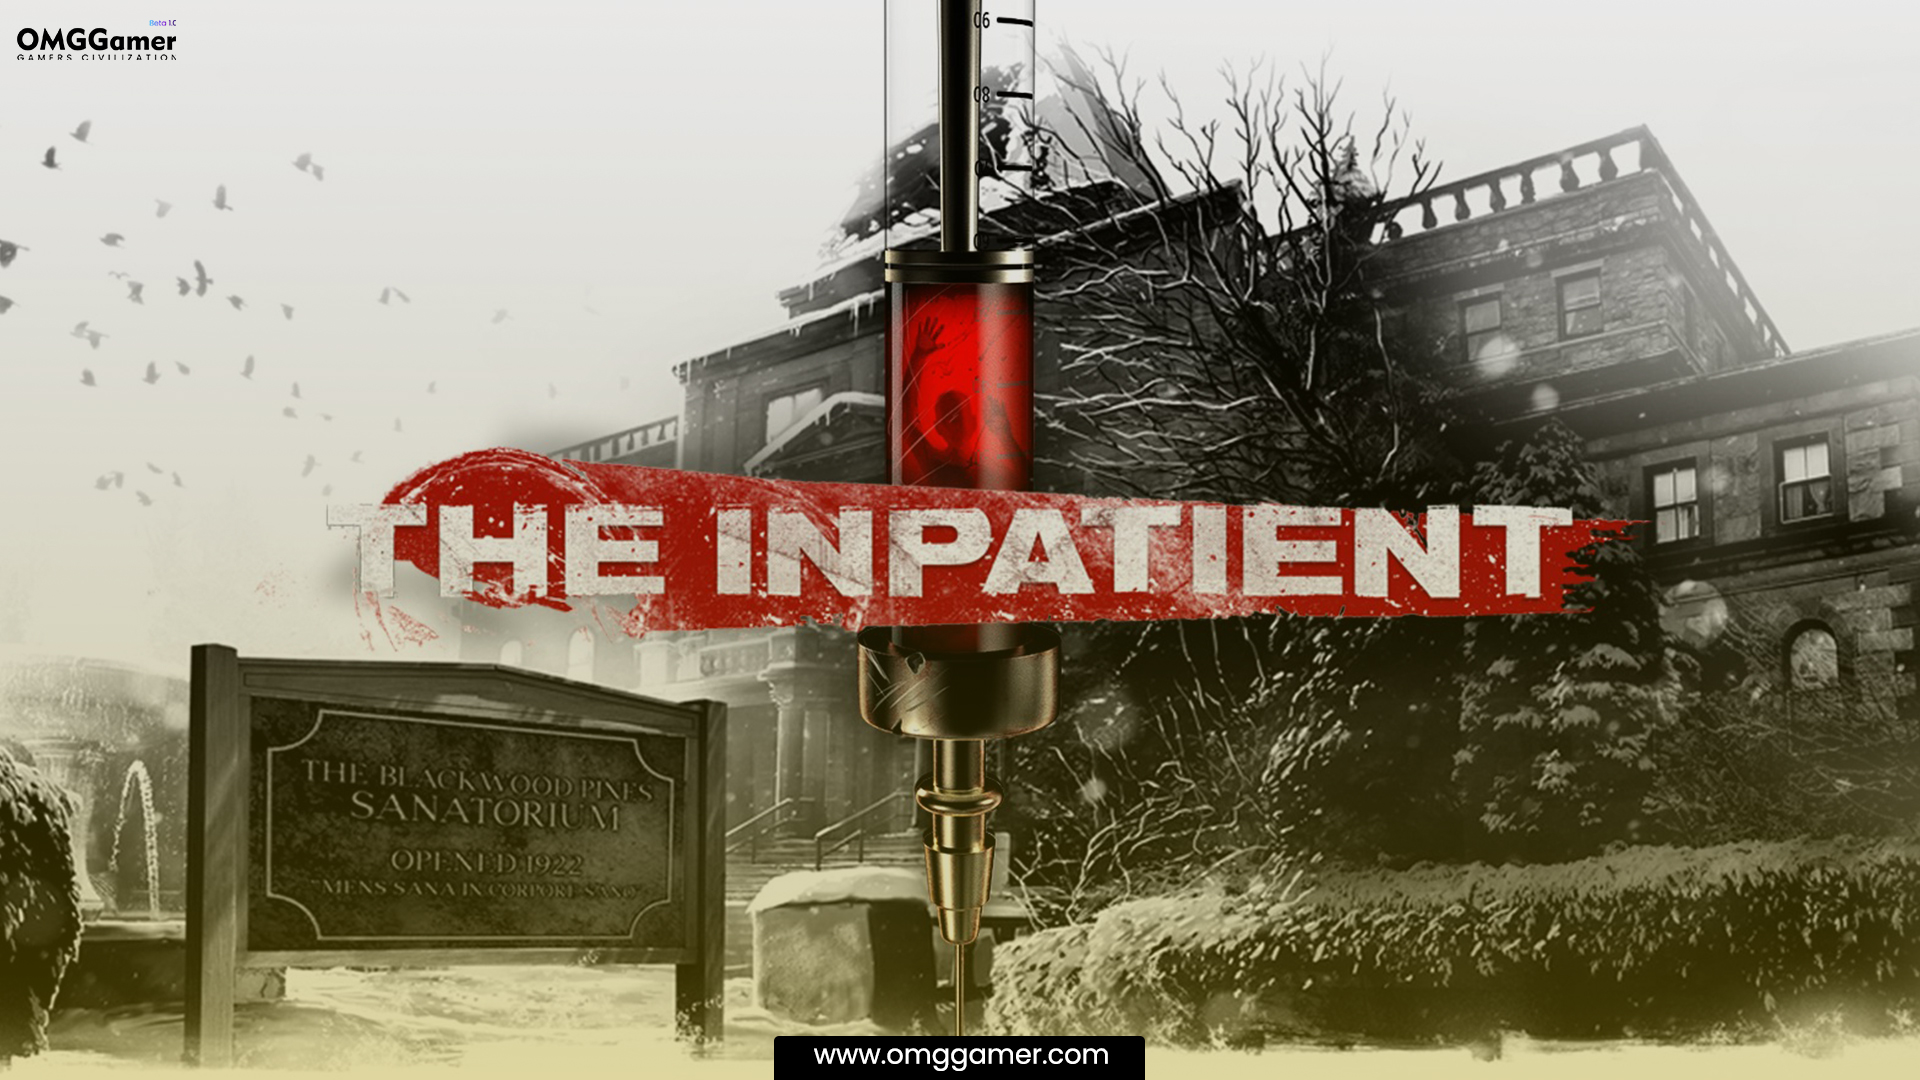 The Inpatient: Games Like Until Dawn